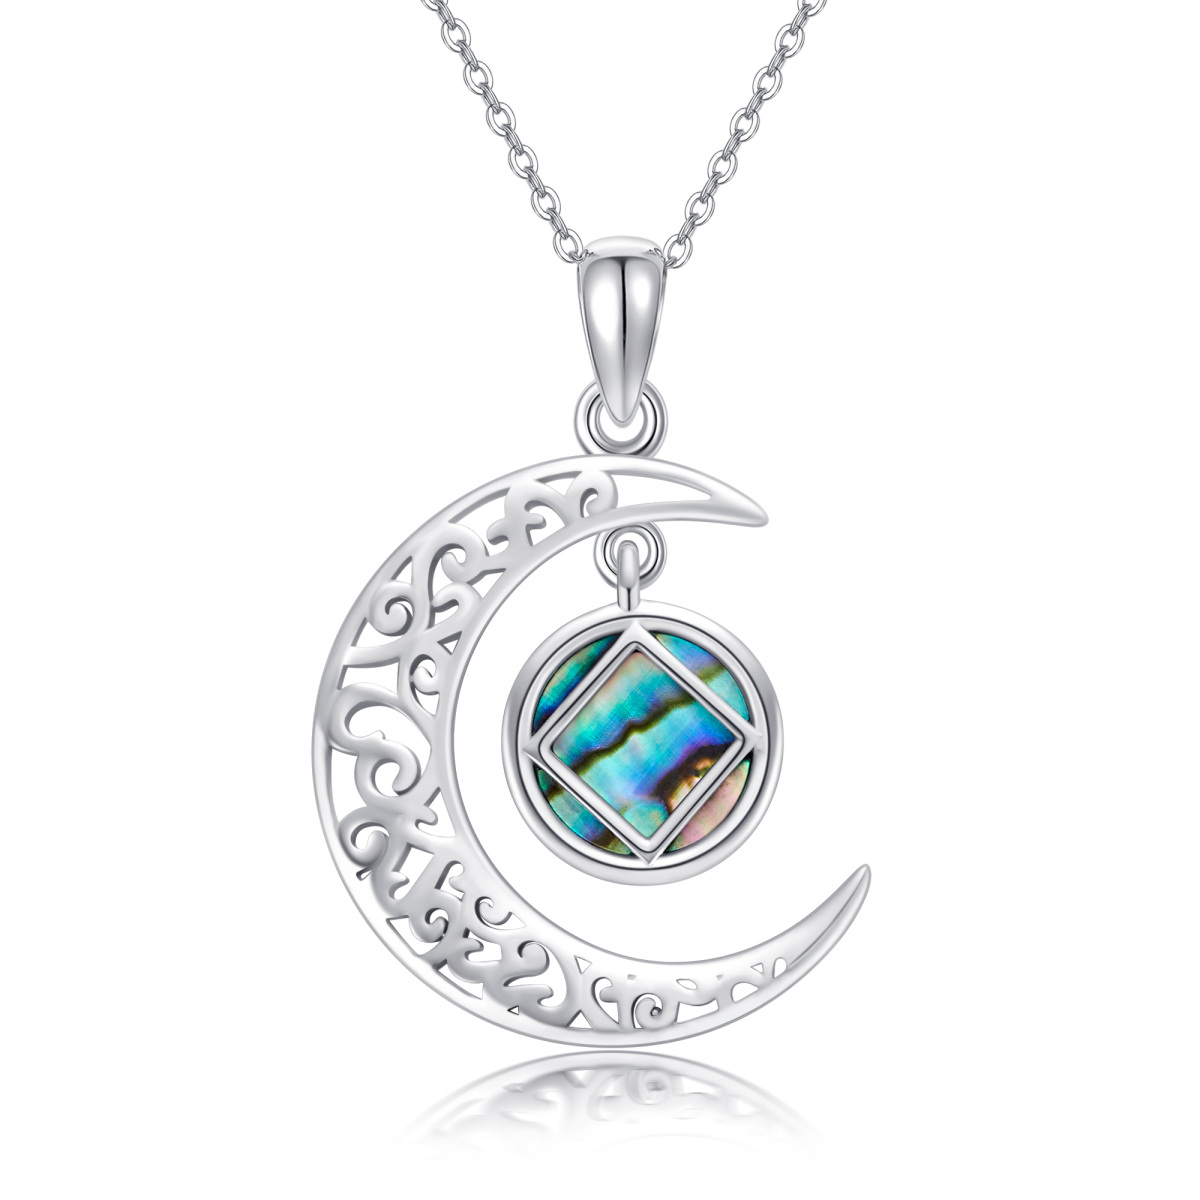 Sterling Silver Abalone Shellfish Celtic Knot Moon & Narcotics Anonymous Pendant Necklace-1